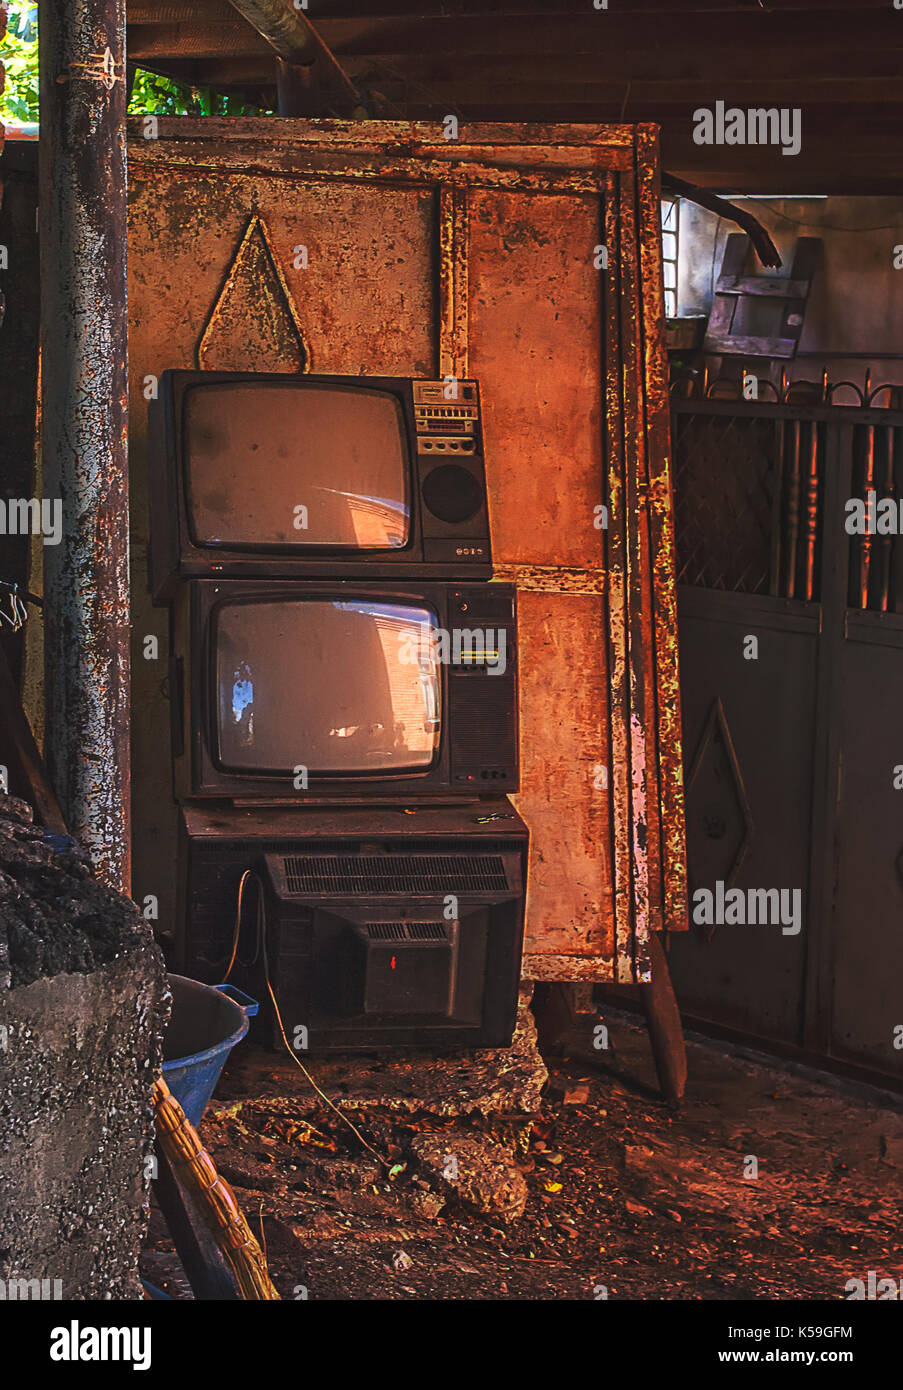 Old Tv Sets High Resolution Stock Photography and Images - Alamy